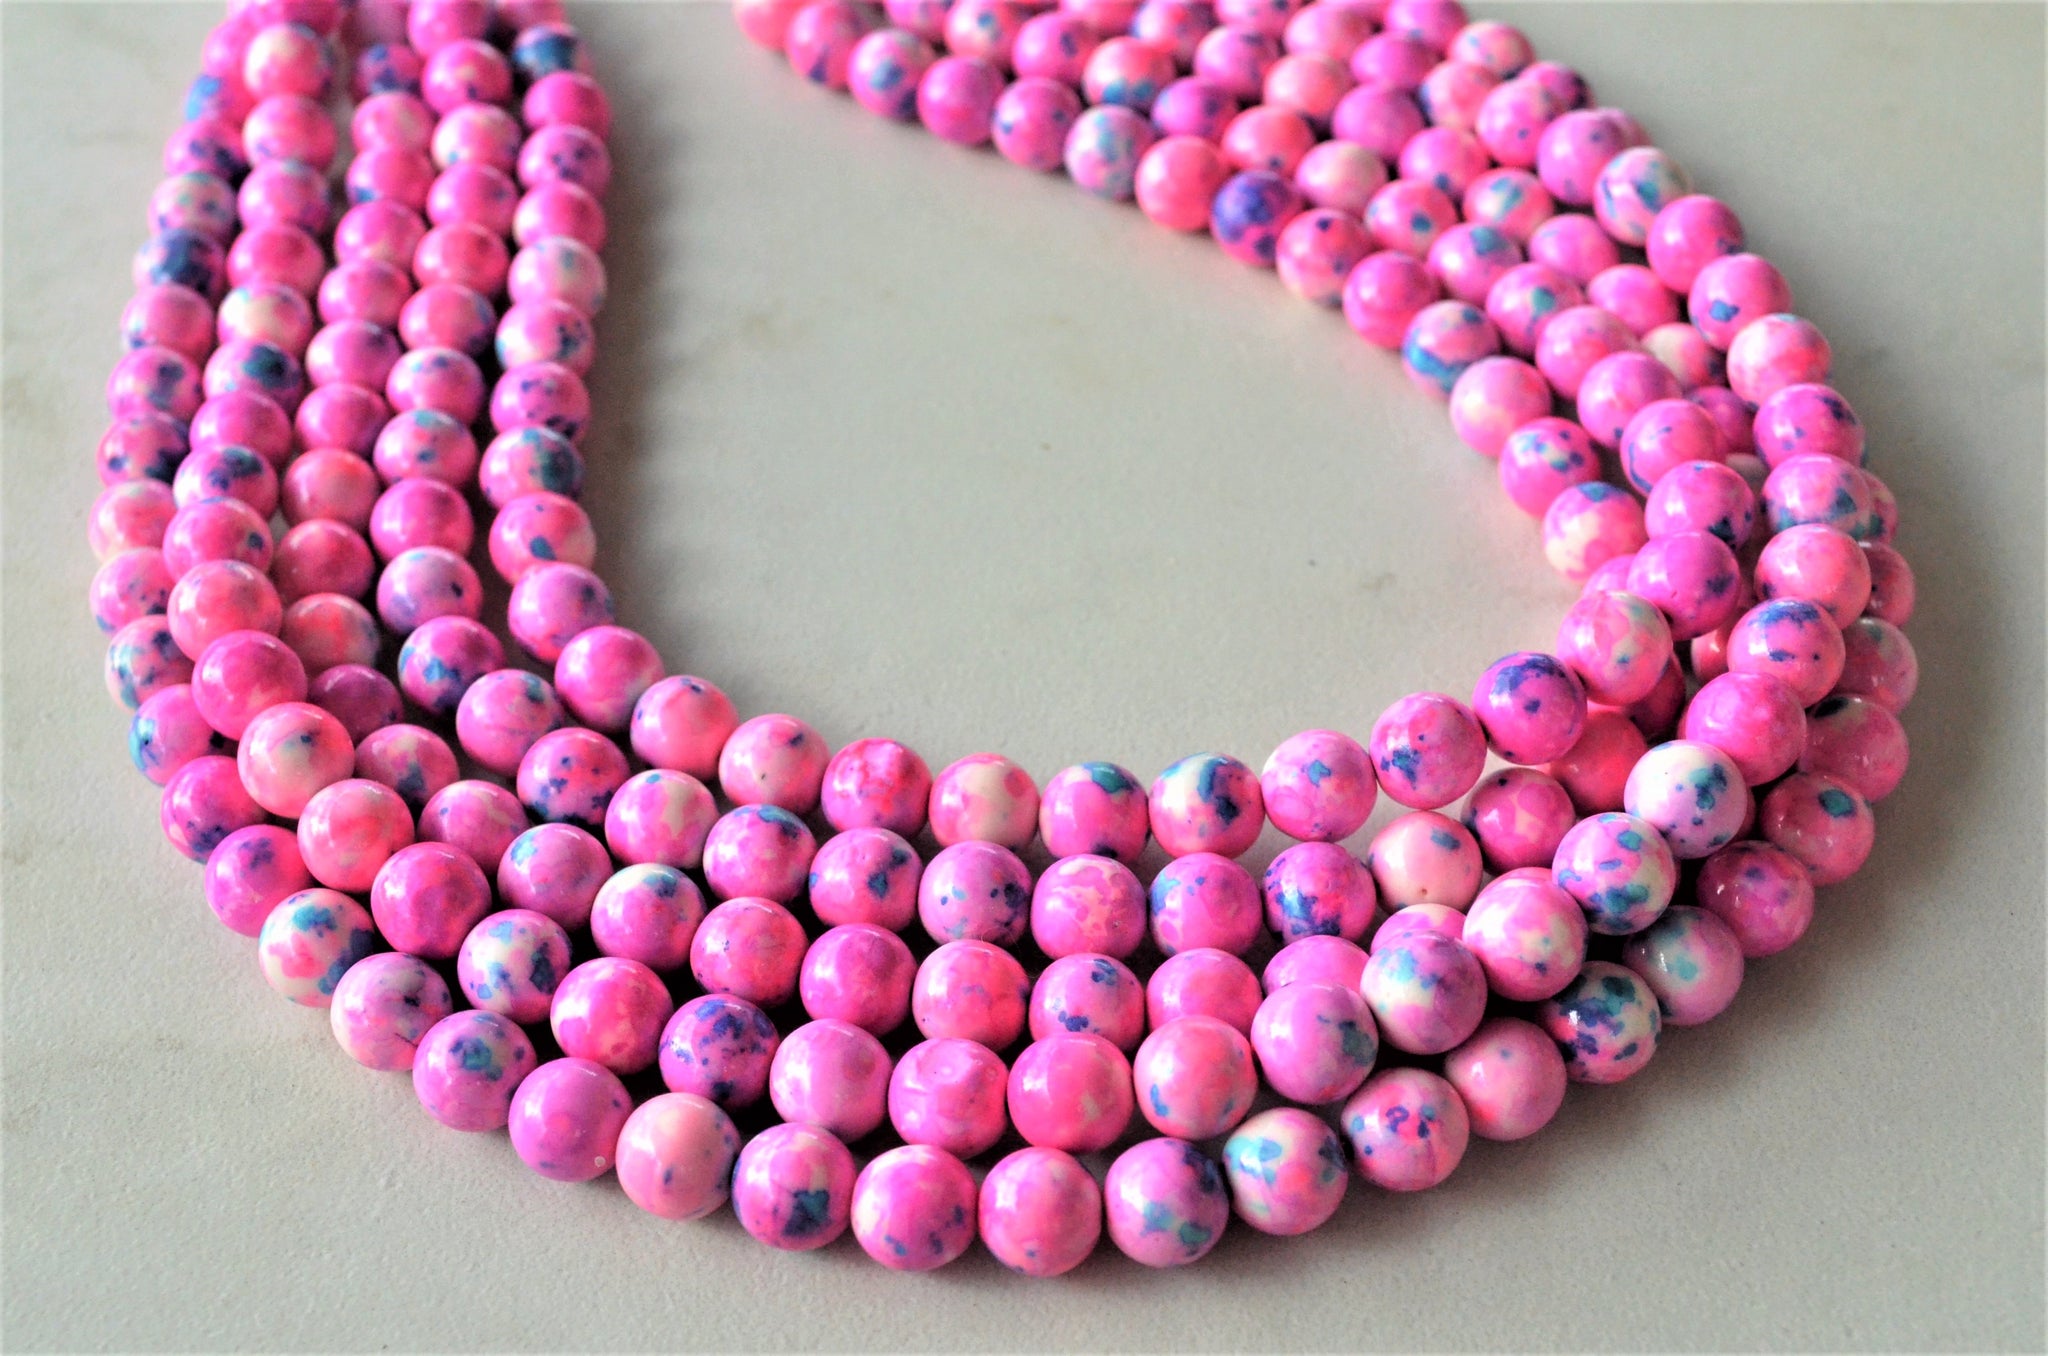 Pink Beads Necklace Designs For Ladies Buy Now – Gehna Shop